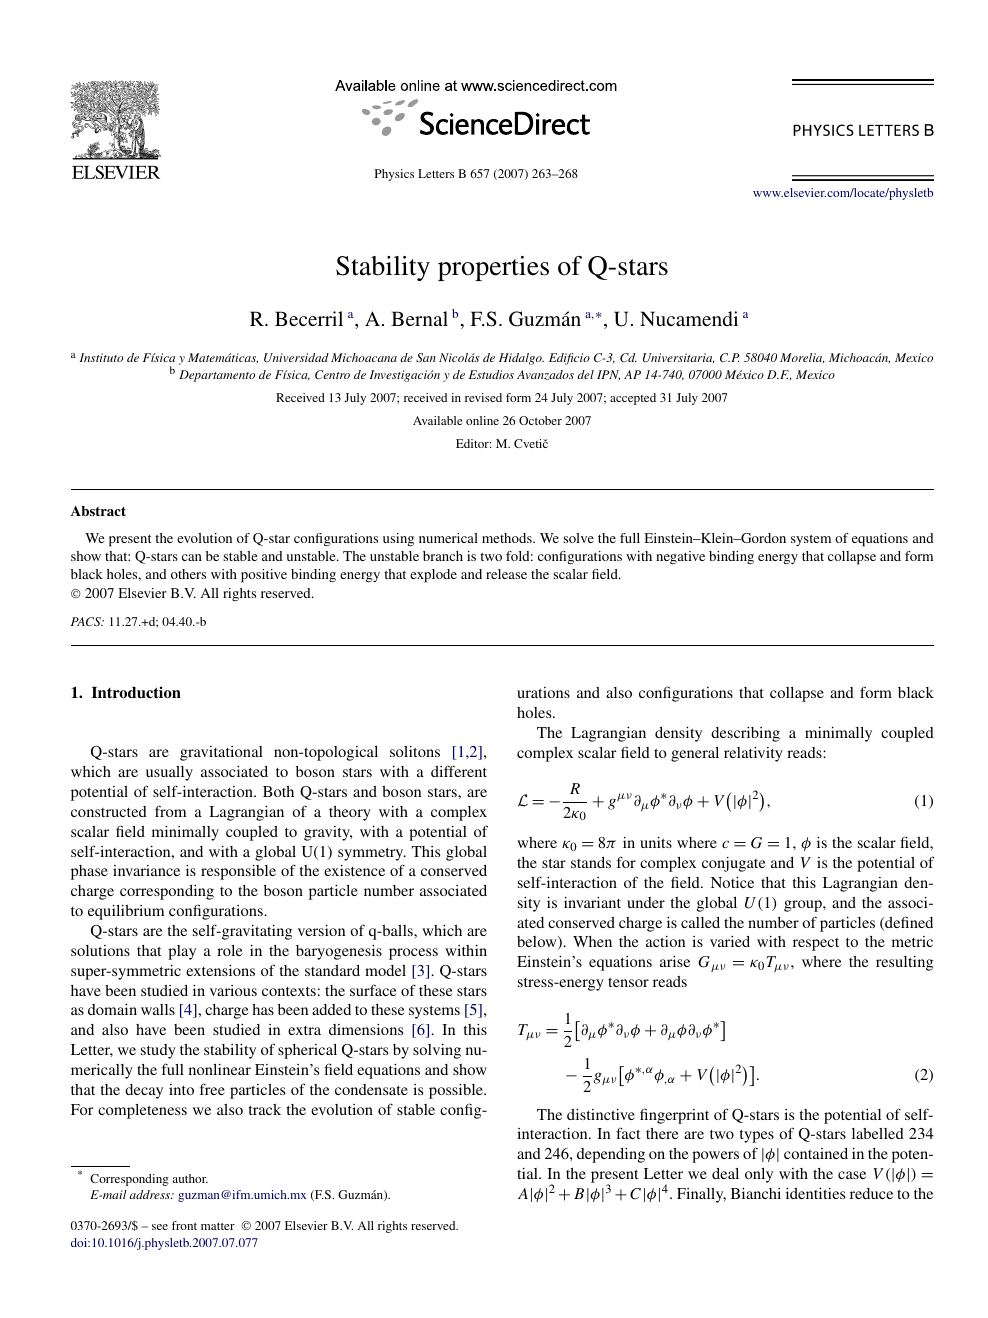 Stability Properties Of Q Stars Topic Of Research Paper In Physical Sciences Download Scholarly Article Pdf And Read For Free On Cyberleninka Open Science Hub